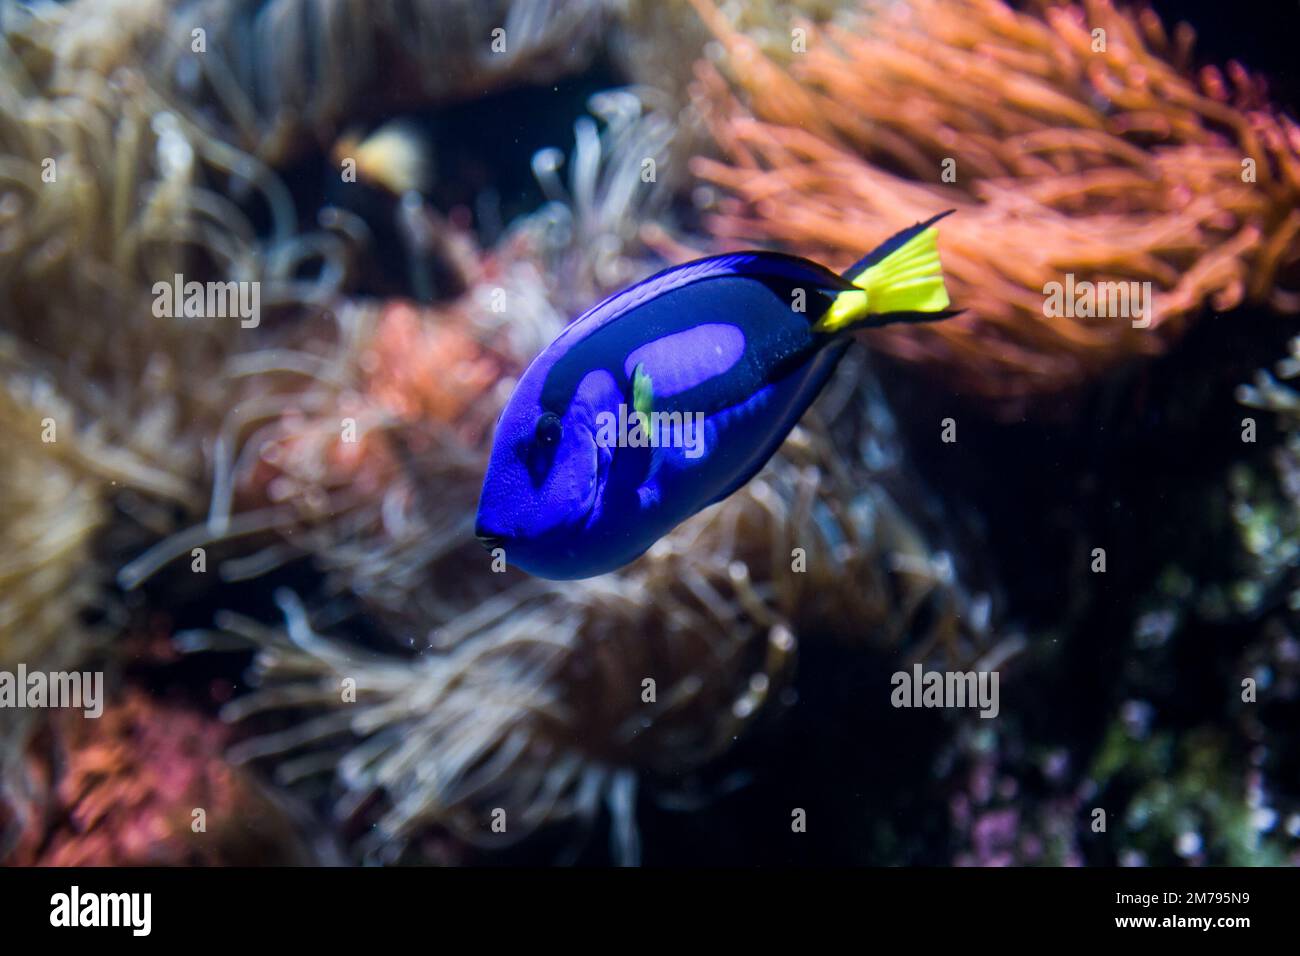 Blue tang fish are found in deep water, among algae and other marine plants. The fish is brightly colored in blue and the fins are yellow. Stock Photo